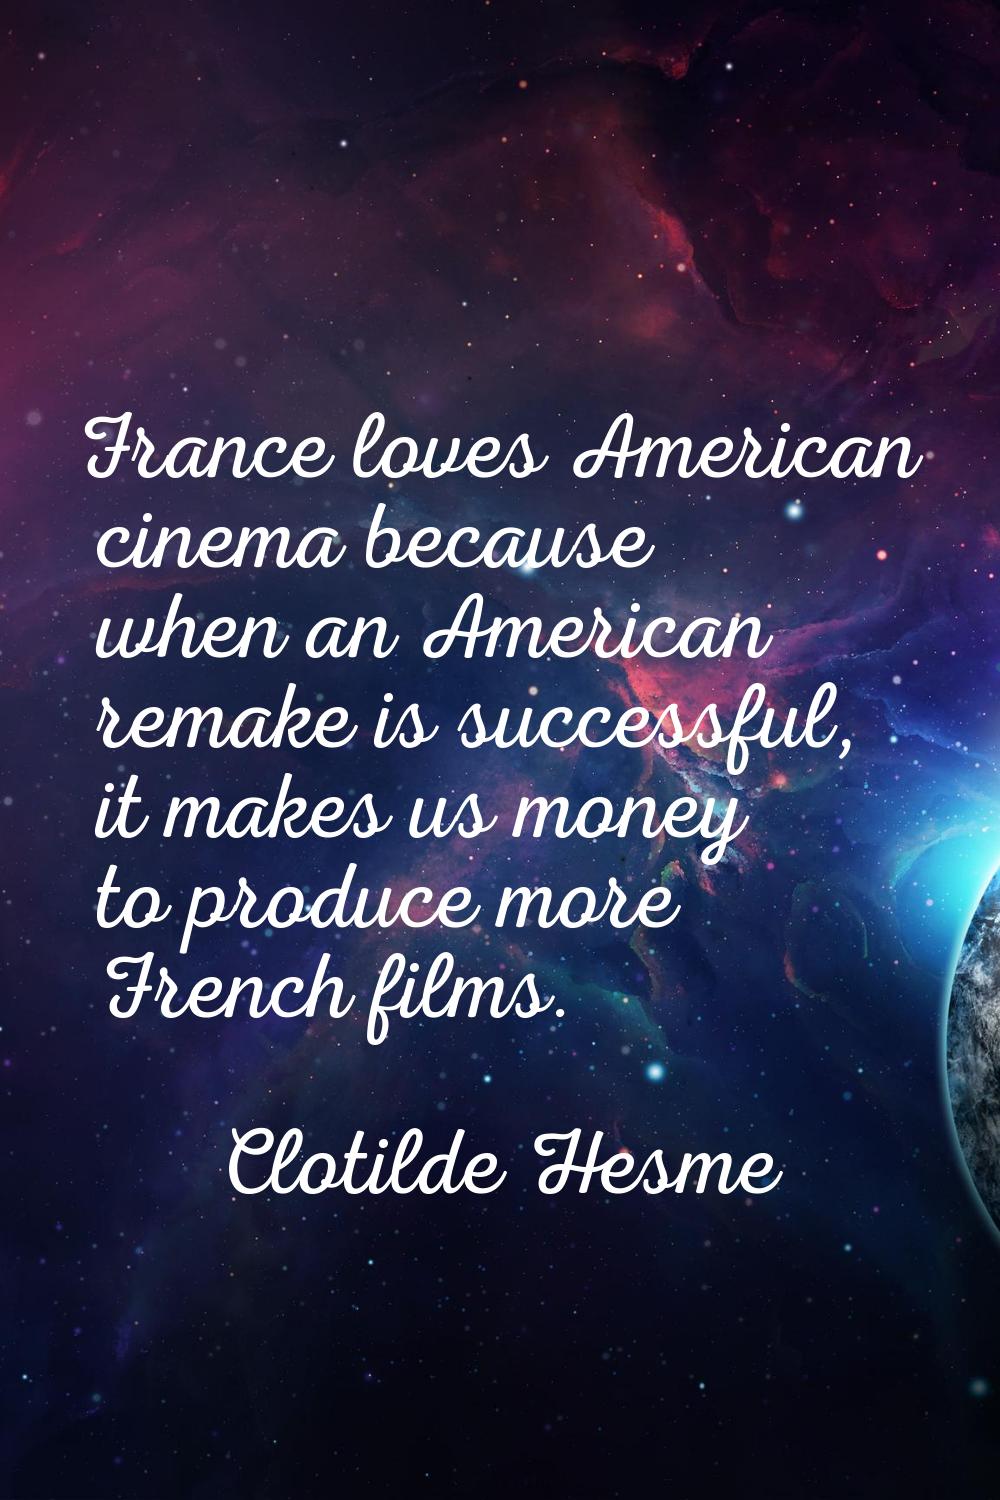 France loves American cinema because when an American remake is successful, it makes us money to pr